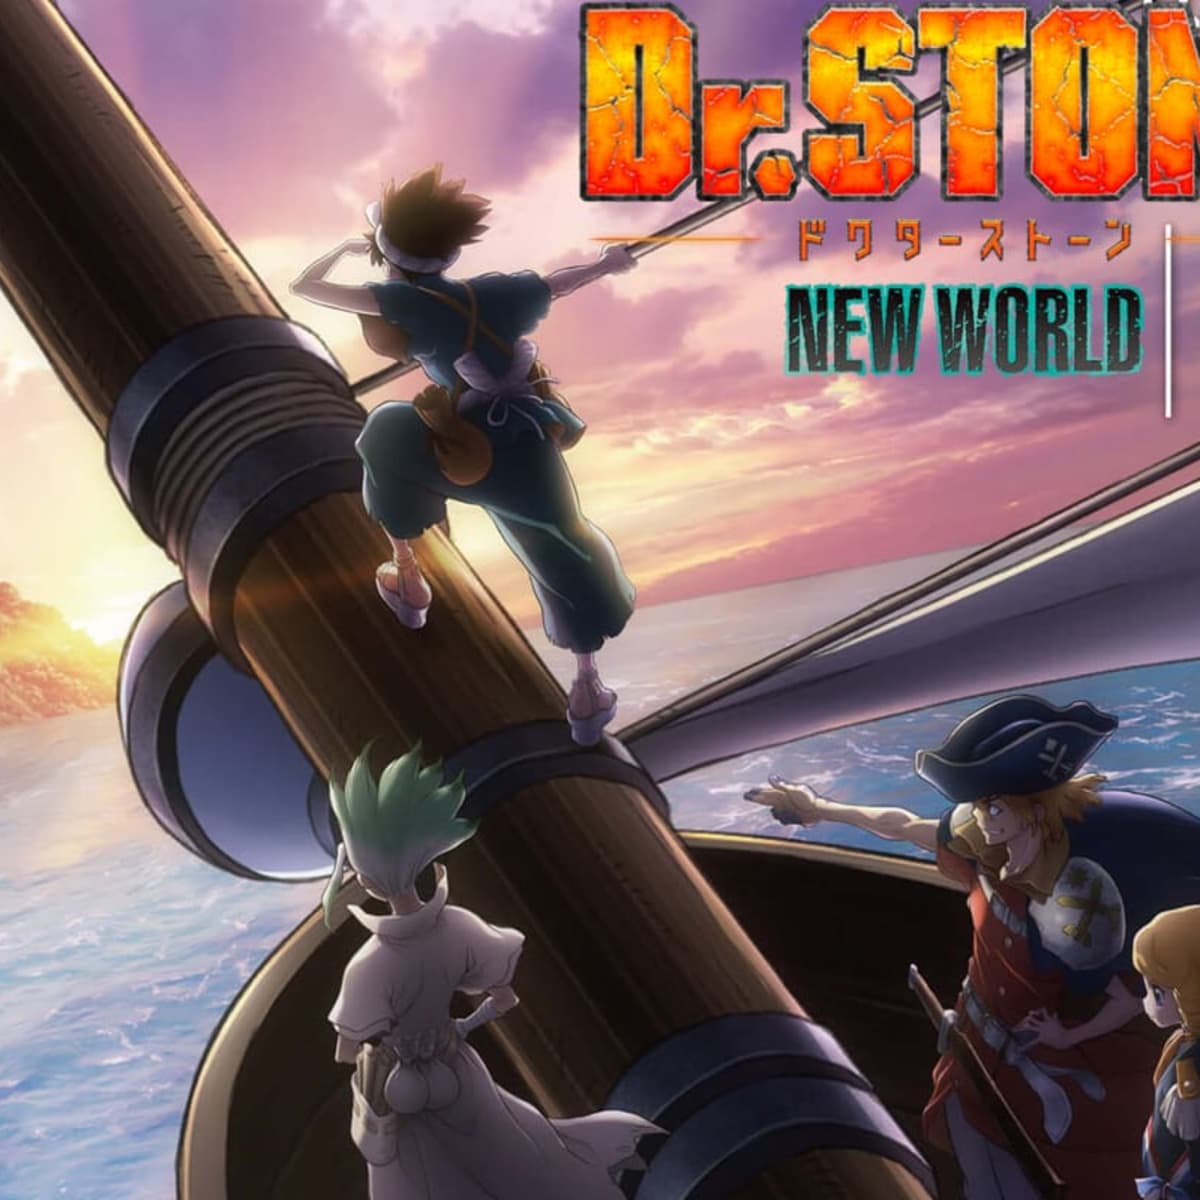 Dr. Stone Season 3 Part 2 Episode 2 - Release date and time, what to expect  - Hindustan Times